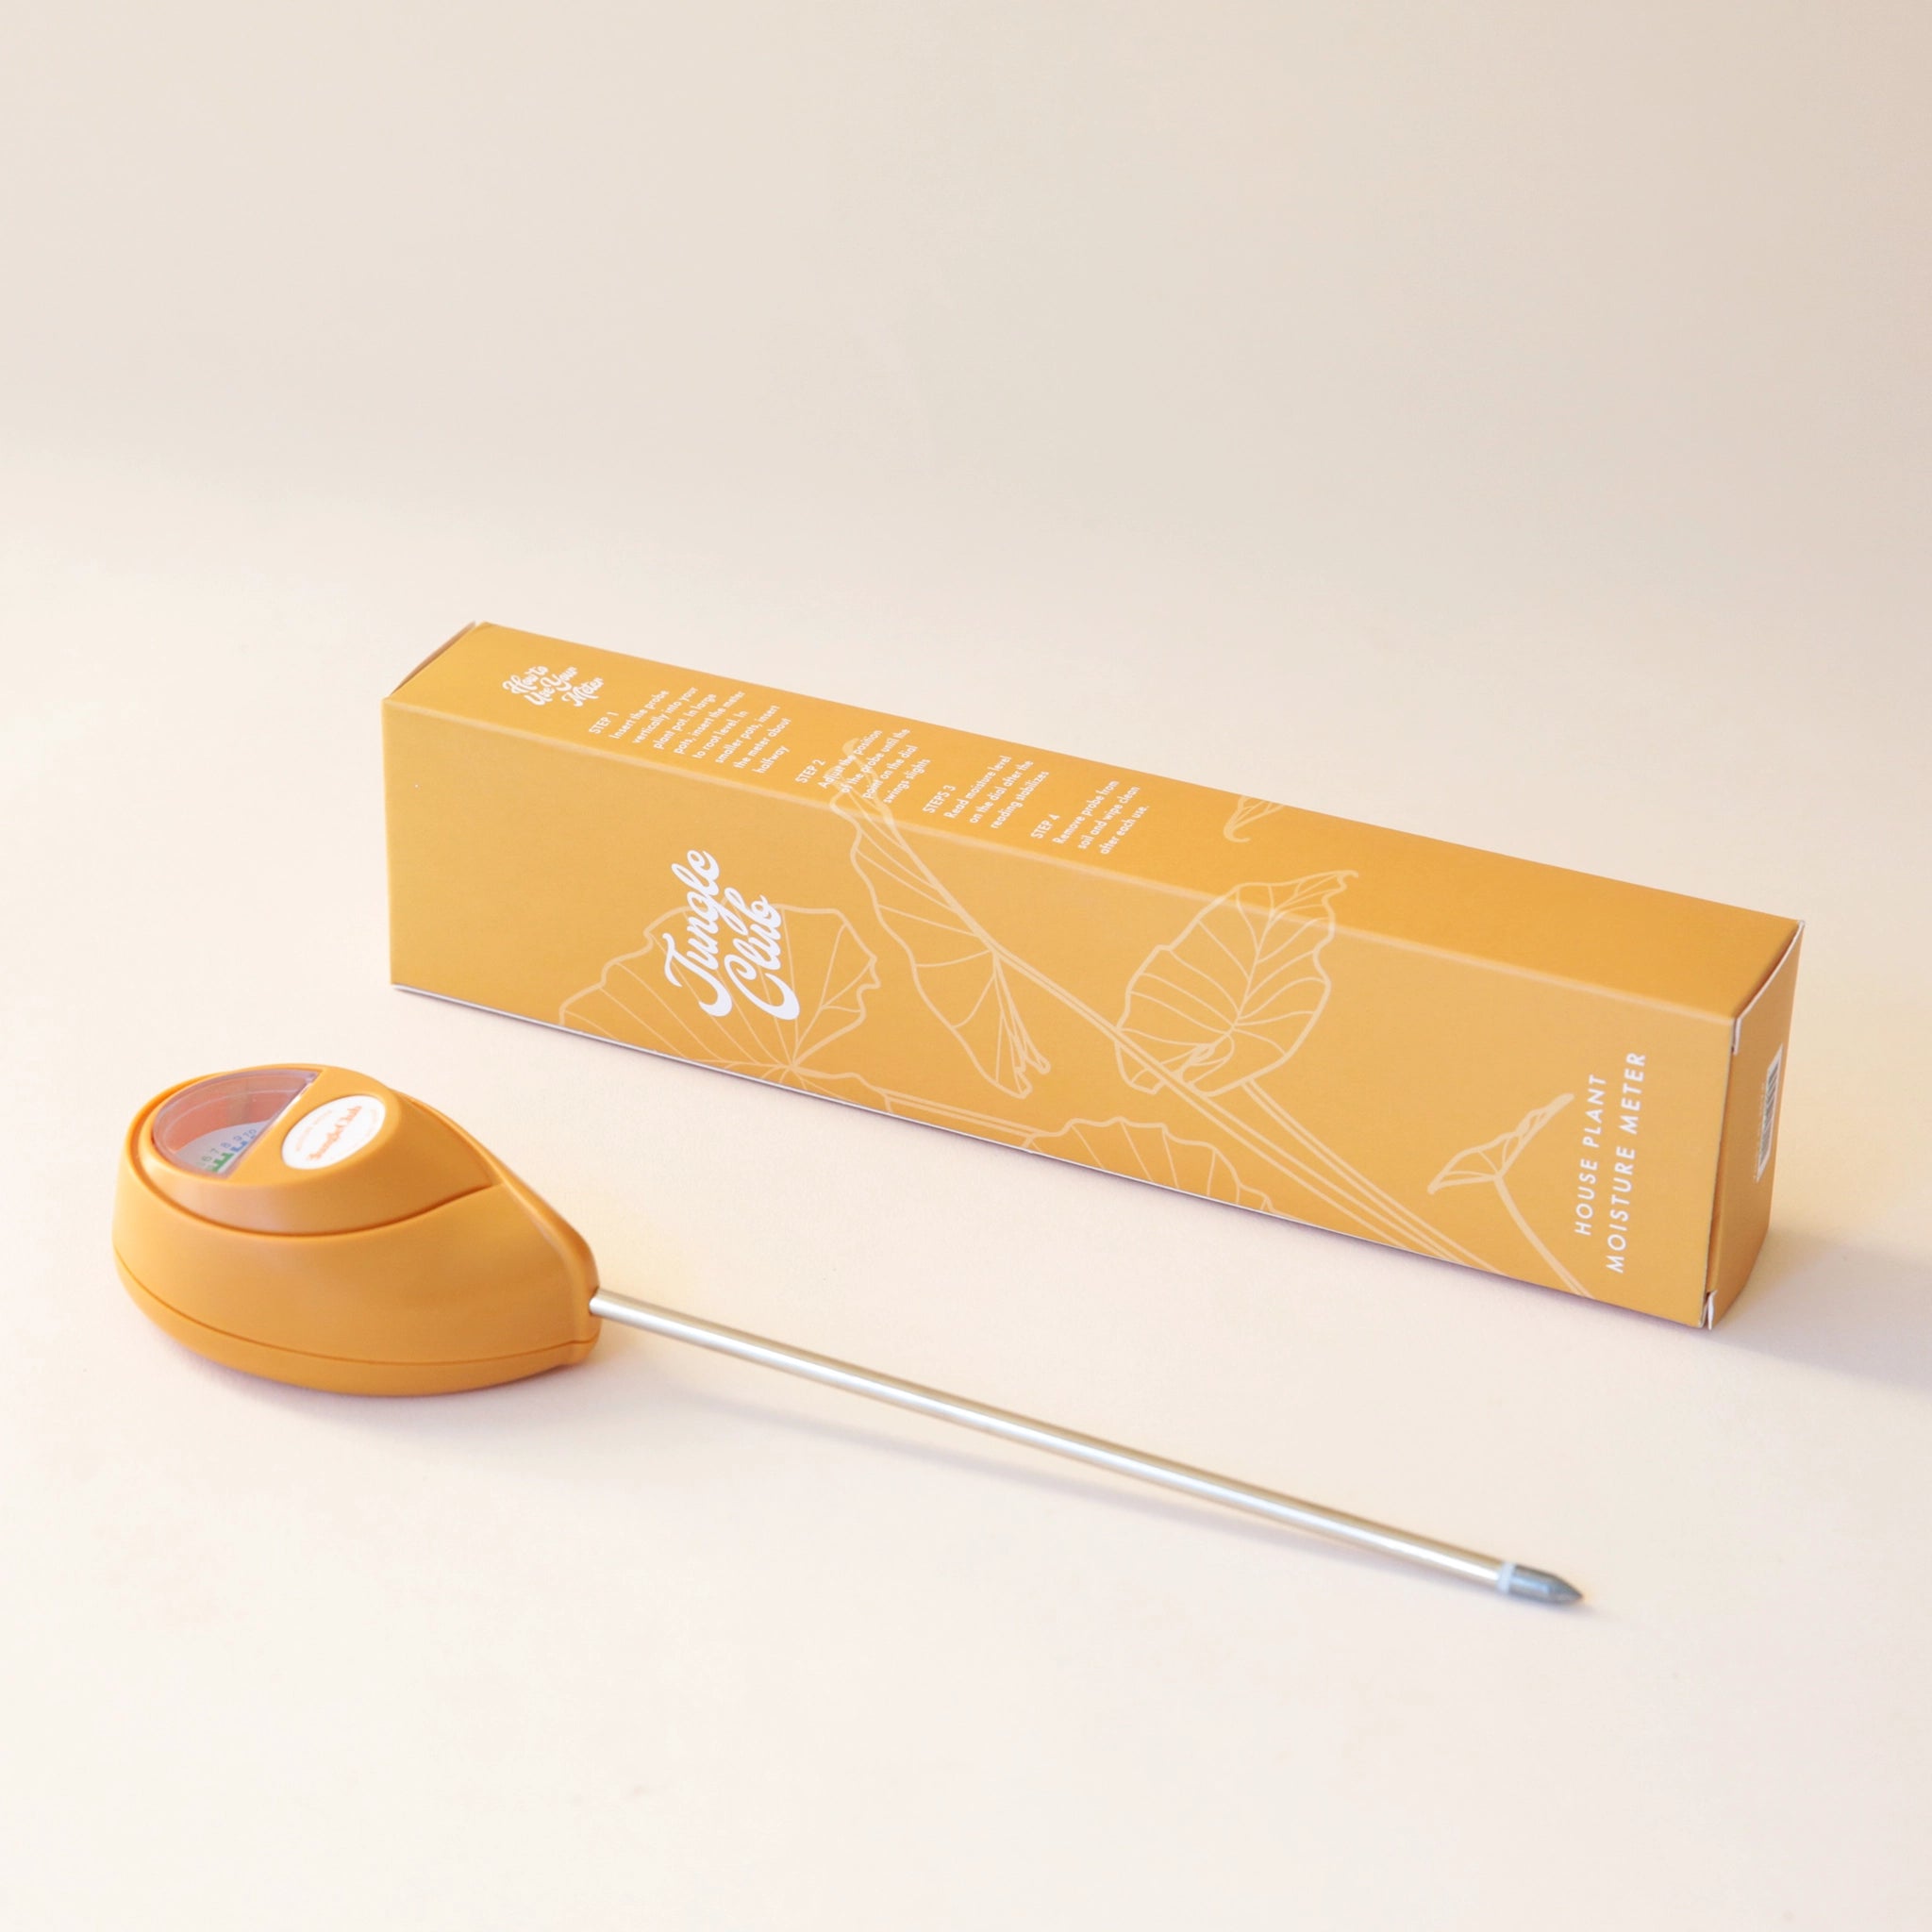 An orange moisture meter with a rounded head and a white meter that ranges from dry, moist, or wet along with a small oval label in the front that reads, "Jungle Club".